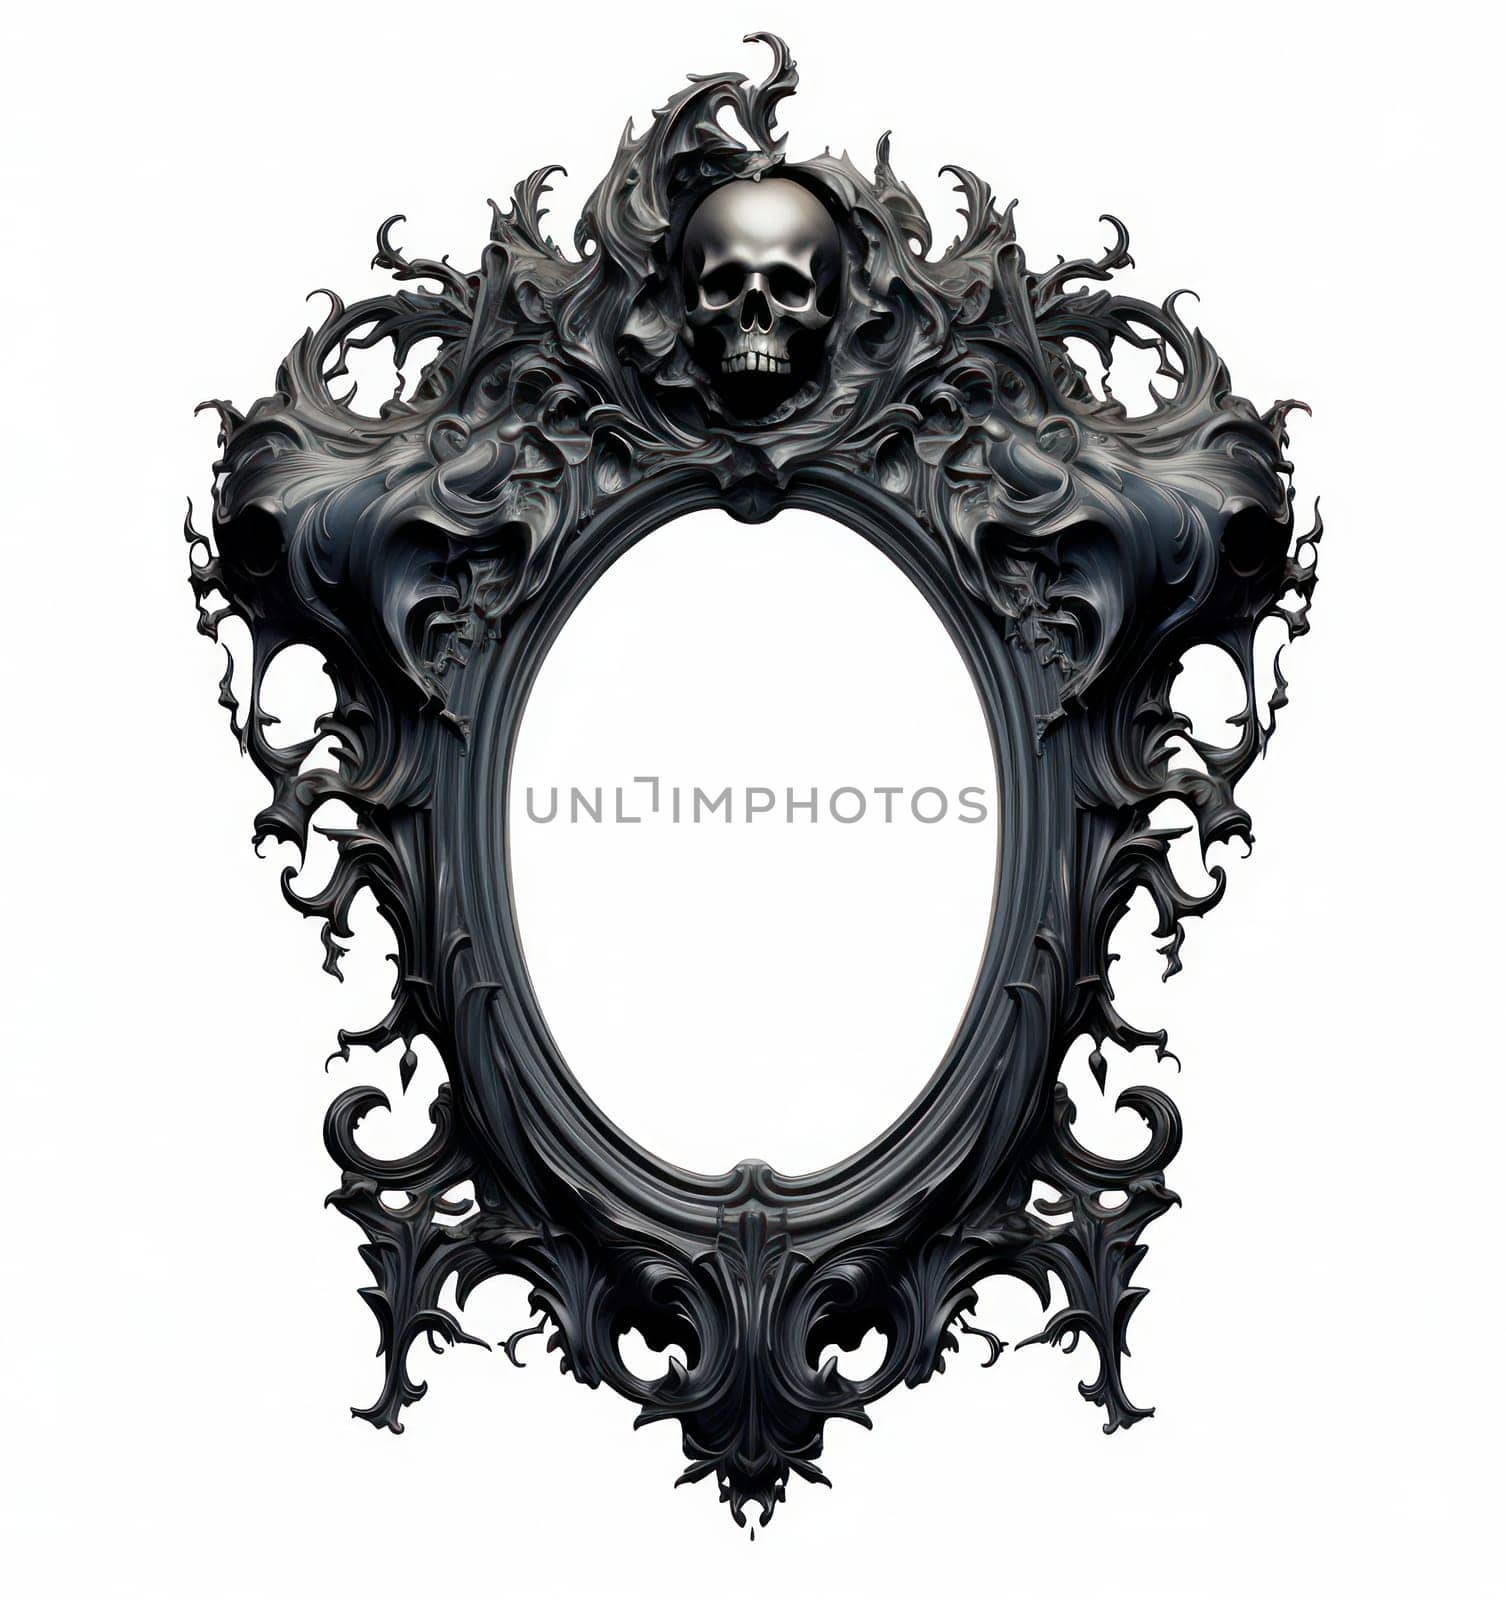 Baroque Elegance: Victorian Vintage Mirror, Ornate Frame, and Decorative Floral Patterns on White Background by Vichizh